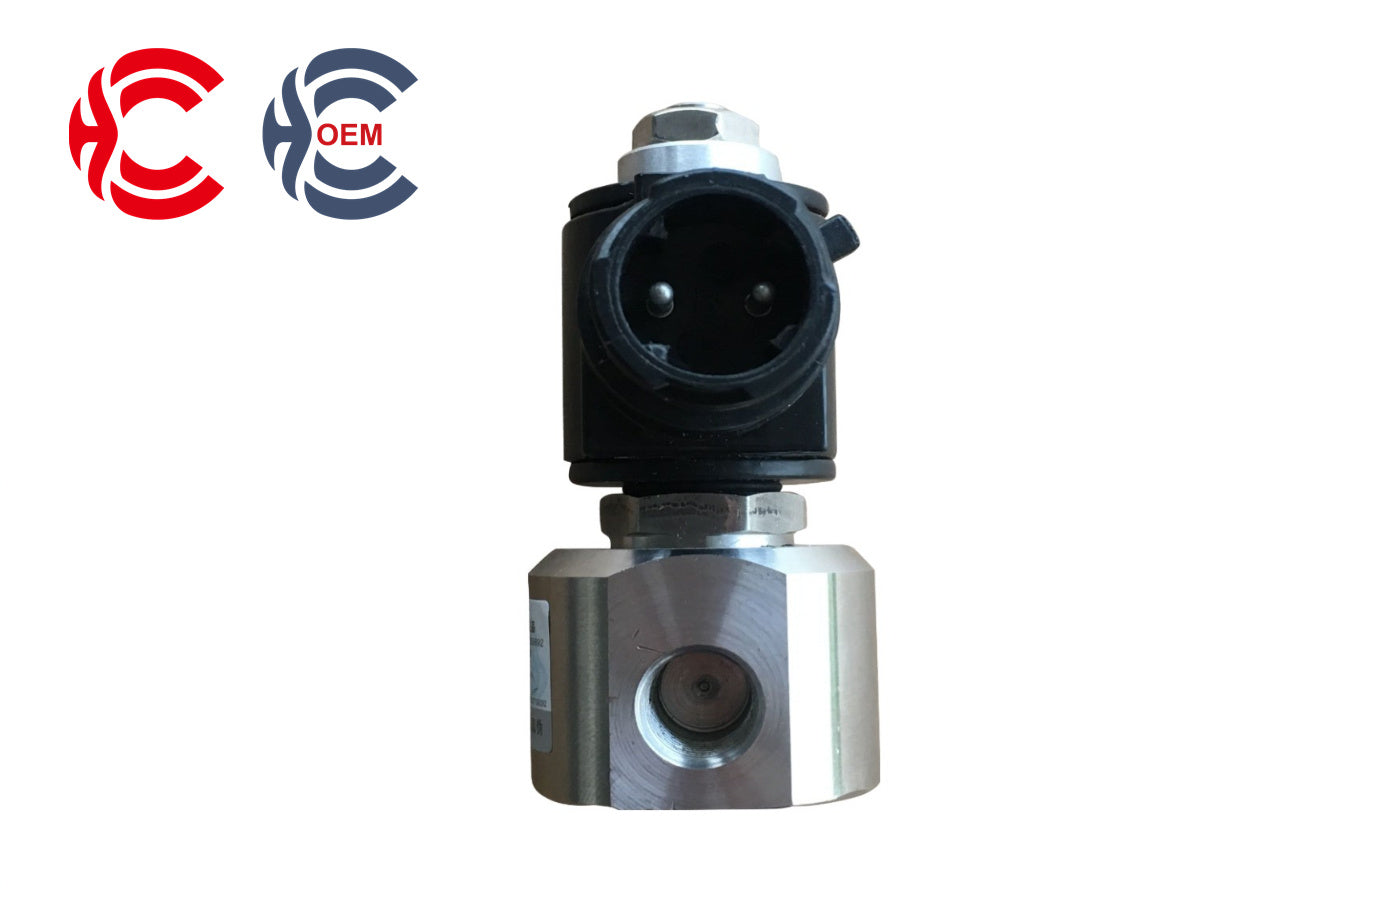 OEM: FAW Stainless Base Adblue/Urea Tank Solenoid ValveMaterial: ABS MetalColor: blackOrigin: Made in ChinaWeight: 200gPacking List: 1* Urea Heating Solenoid Valve More ServiceWe can provide OEM Manufacturing serviceWe can Be your one-step solution for Auto PartsWe can provide technical scheme for you Feel Free to Contact Us, We will get back to you as soon as possible.